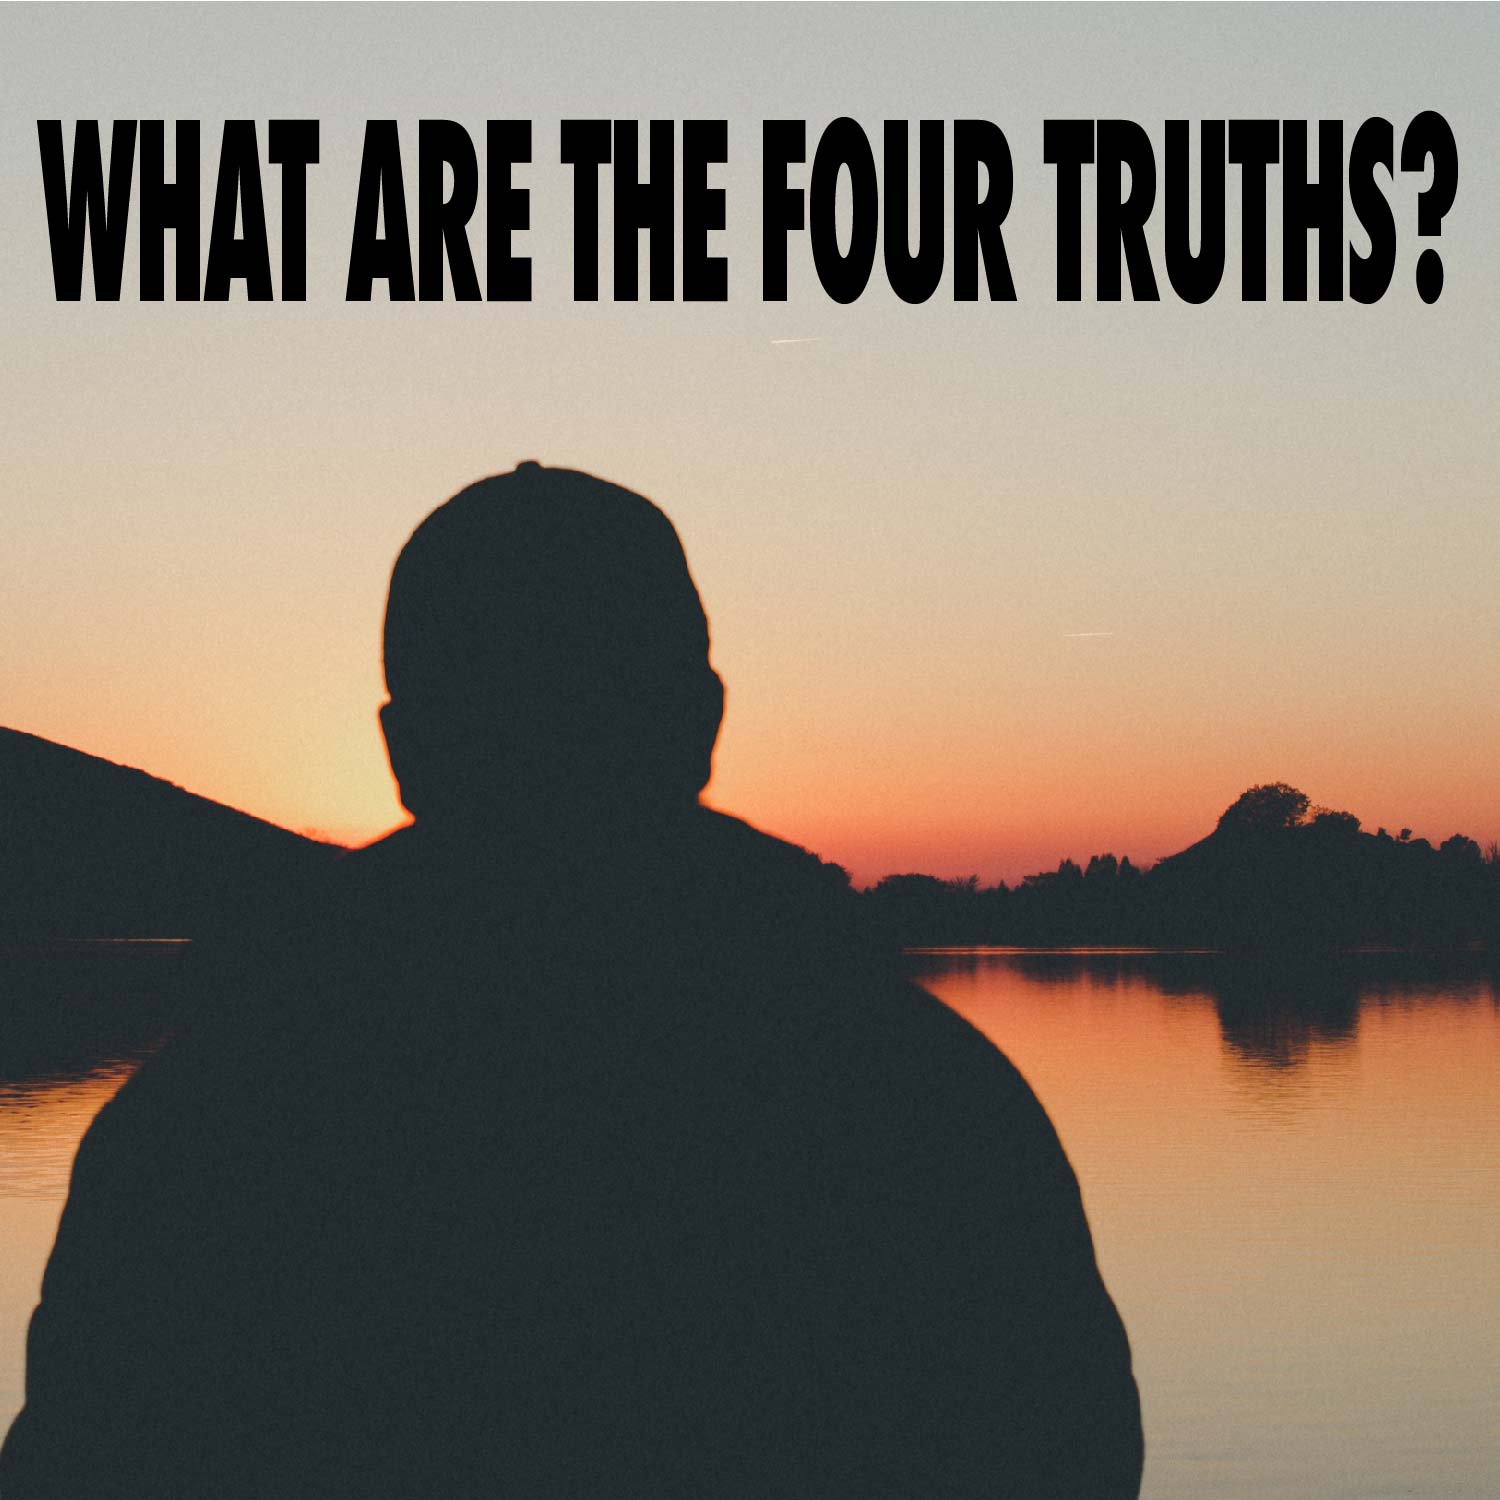 Image of silhouette of man looking over a lake at sunset | Title: WHAT ARE THE FOUR TRUTHS?